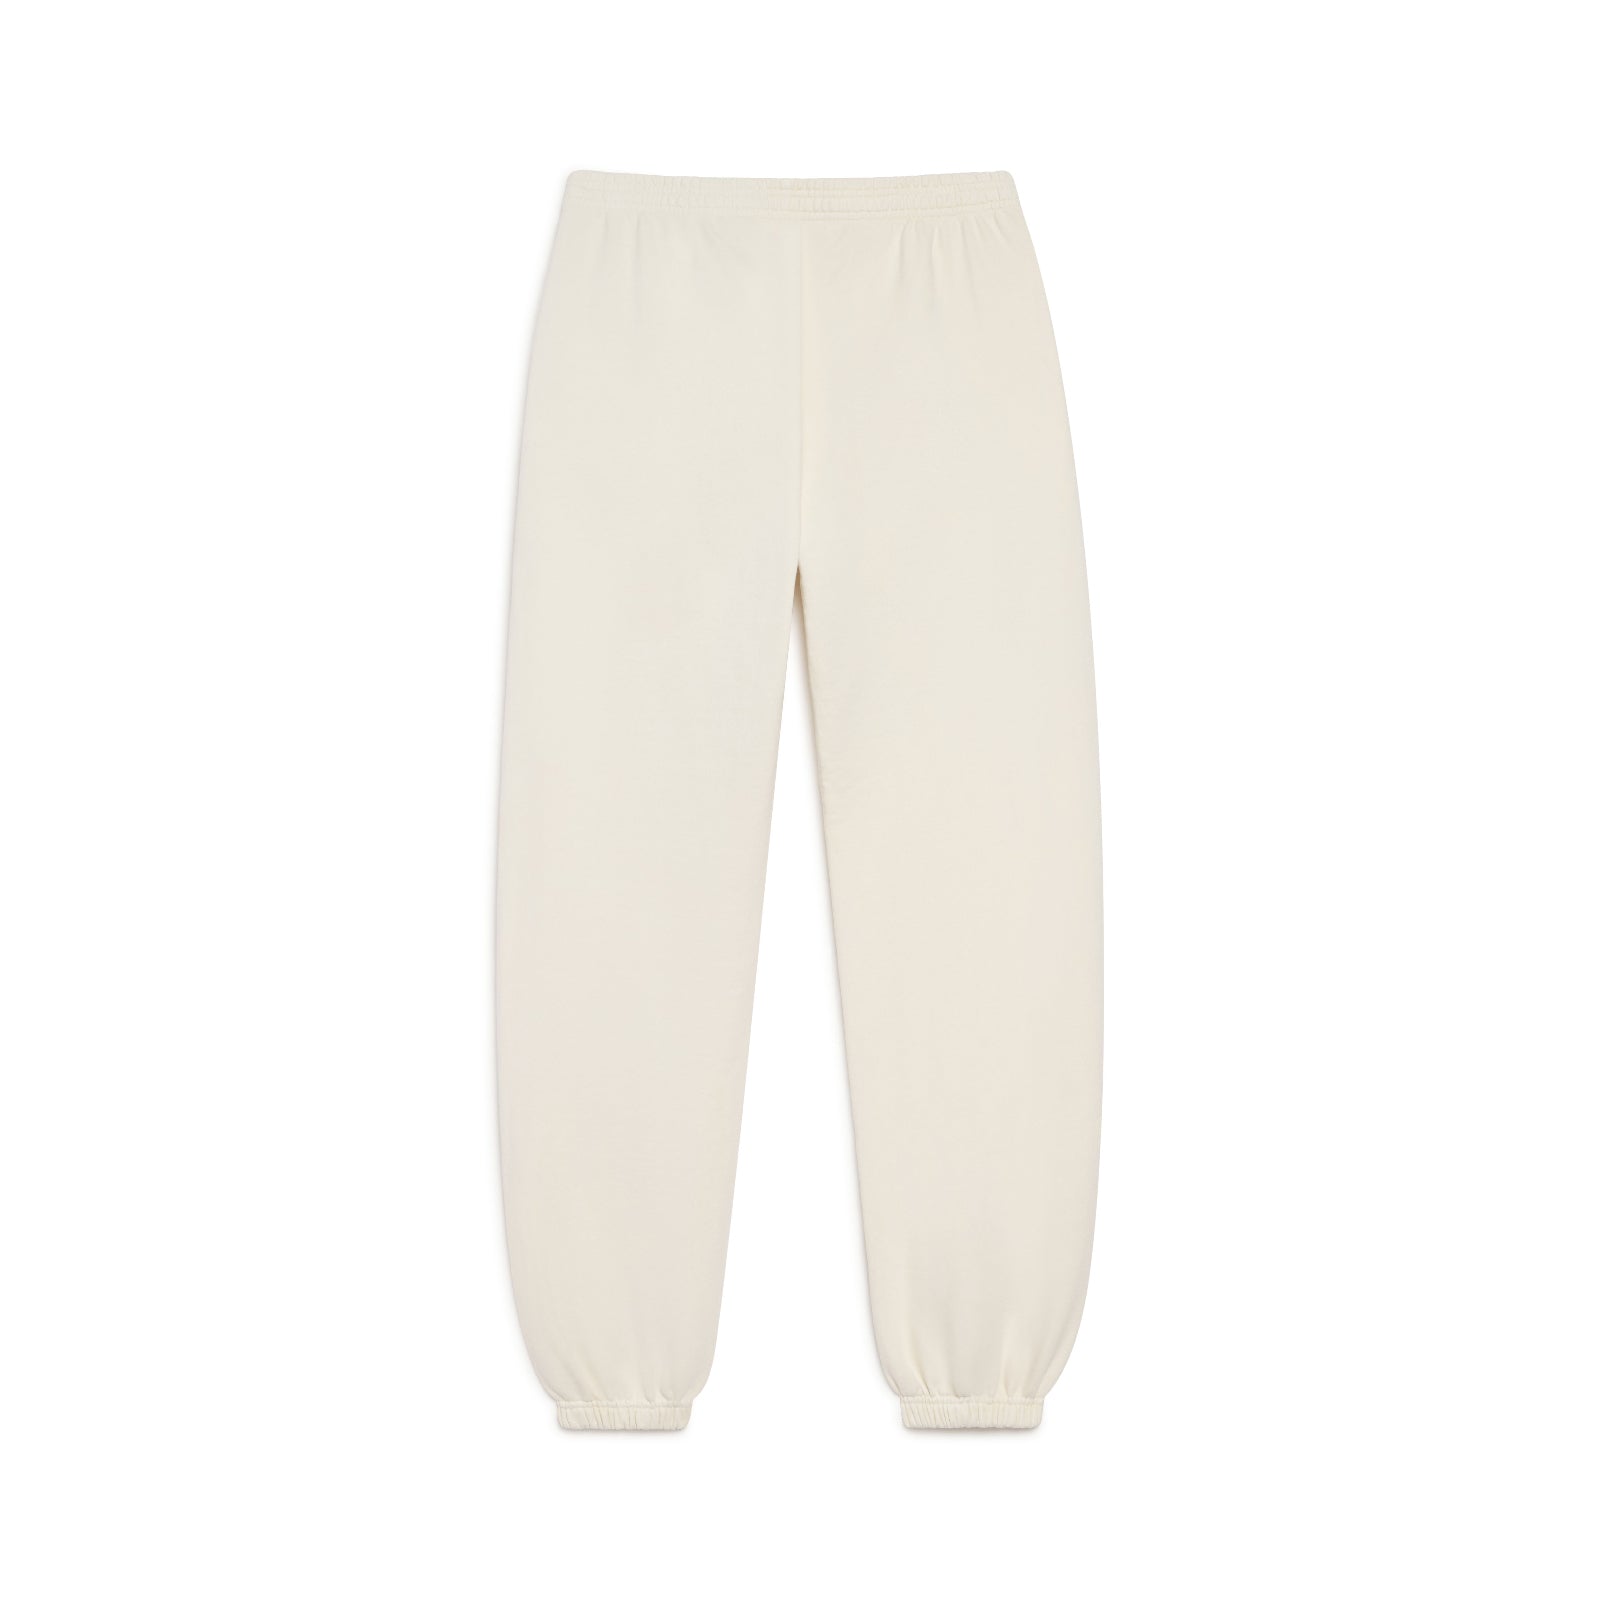 88rising Double Happiness French Terry Sweatpant - Off White – The 88rising  Shop